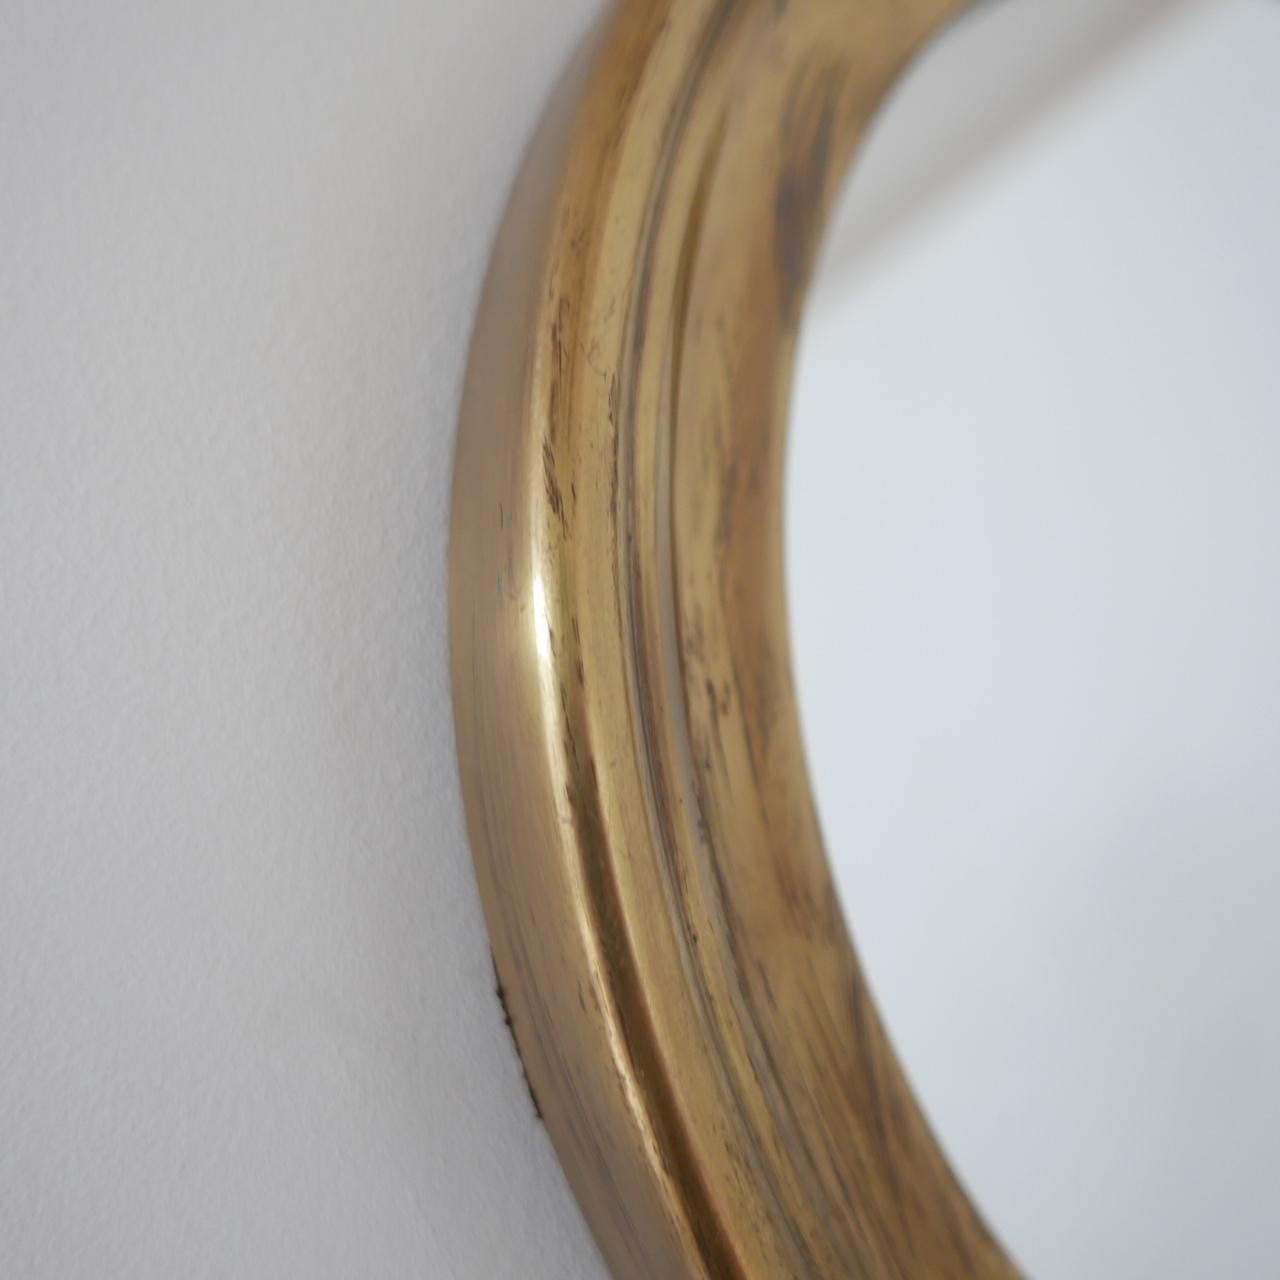 A stylish mid-century Italian stop watch style circular mirror. 

Velvet tie adds character and class. 

Italy, c1970s. 

Good condition, natural patina, some scuffs and wear commensurate with age. 

Dimensions: 30.5 W x 50 H x 2.5 D in cm.